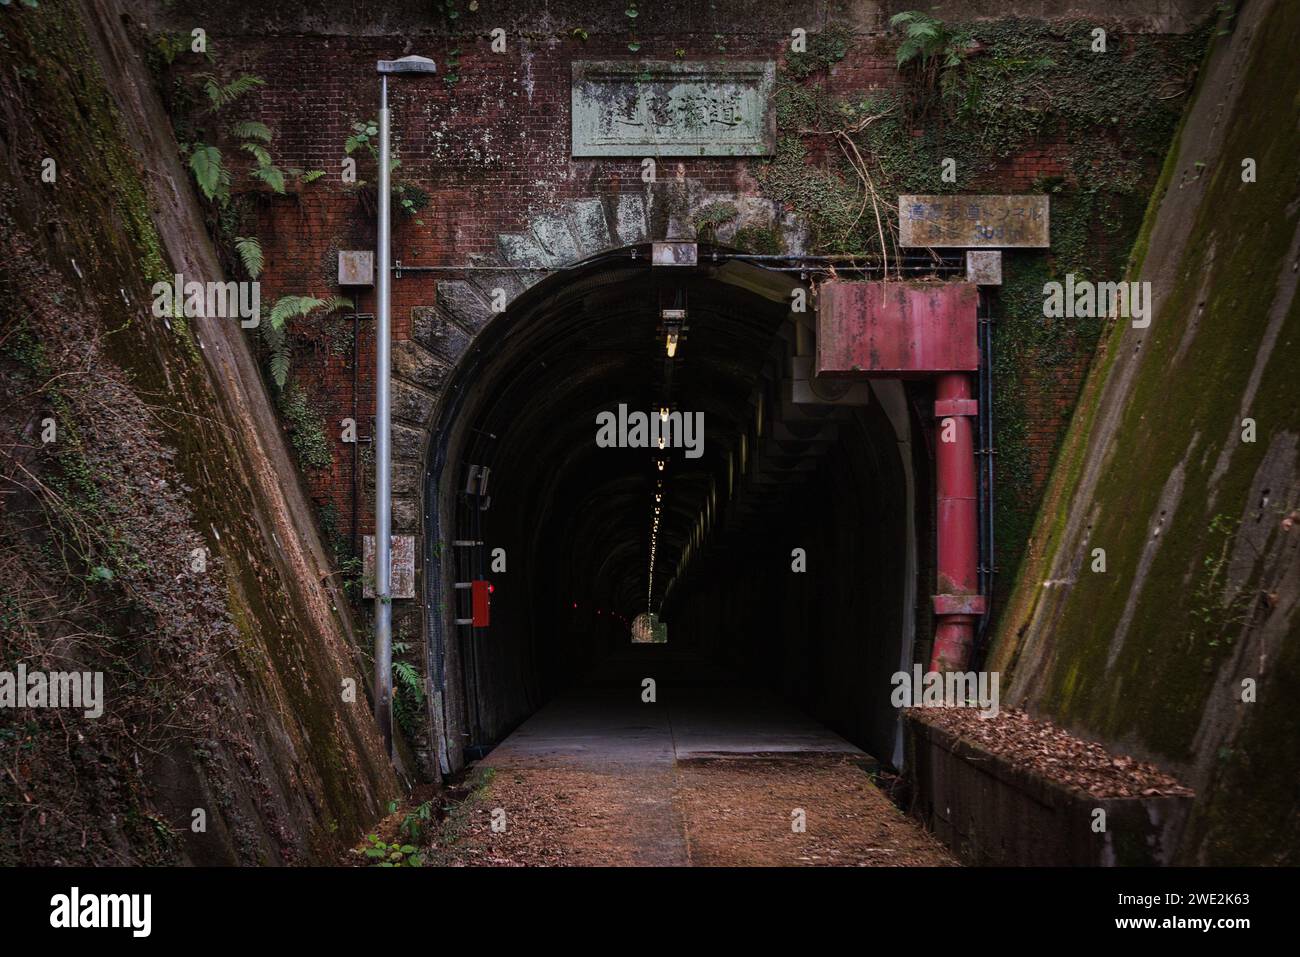 Tunnel in Mie prefecture, Japan Stock Photo